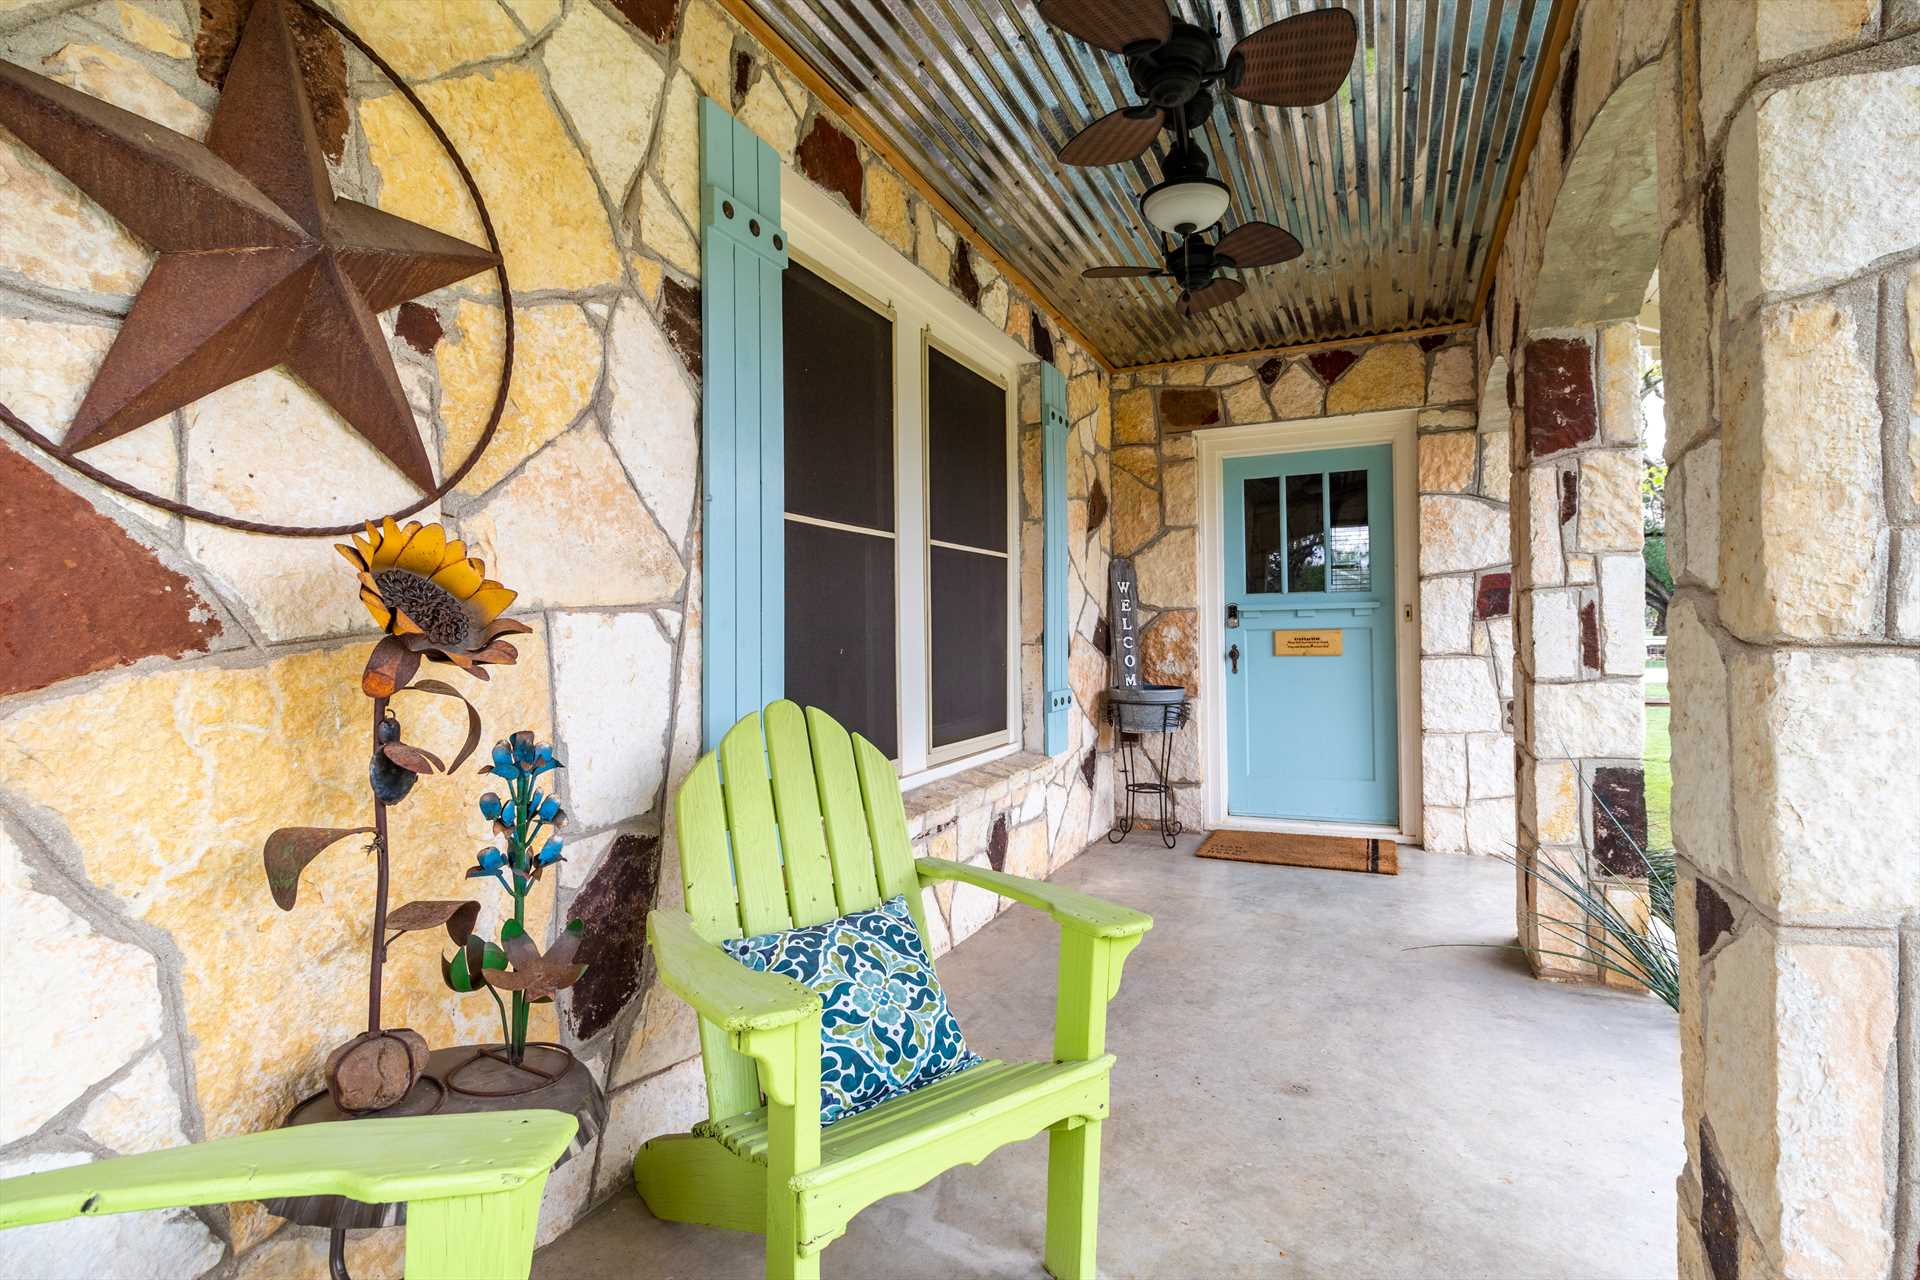                                                 Ceiling fans and fresh Hill Country breezes keep the patio in shaded comfort!